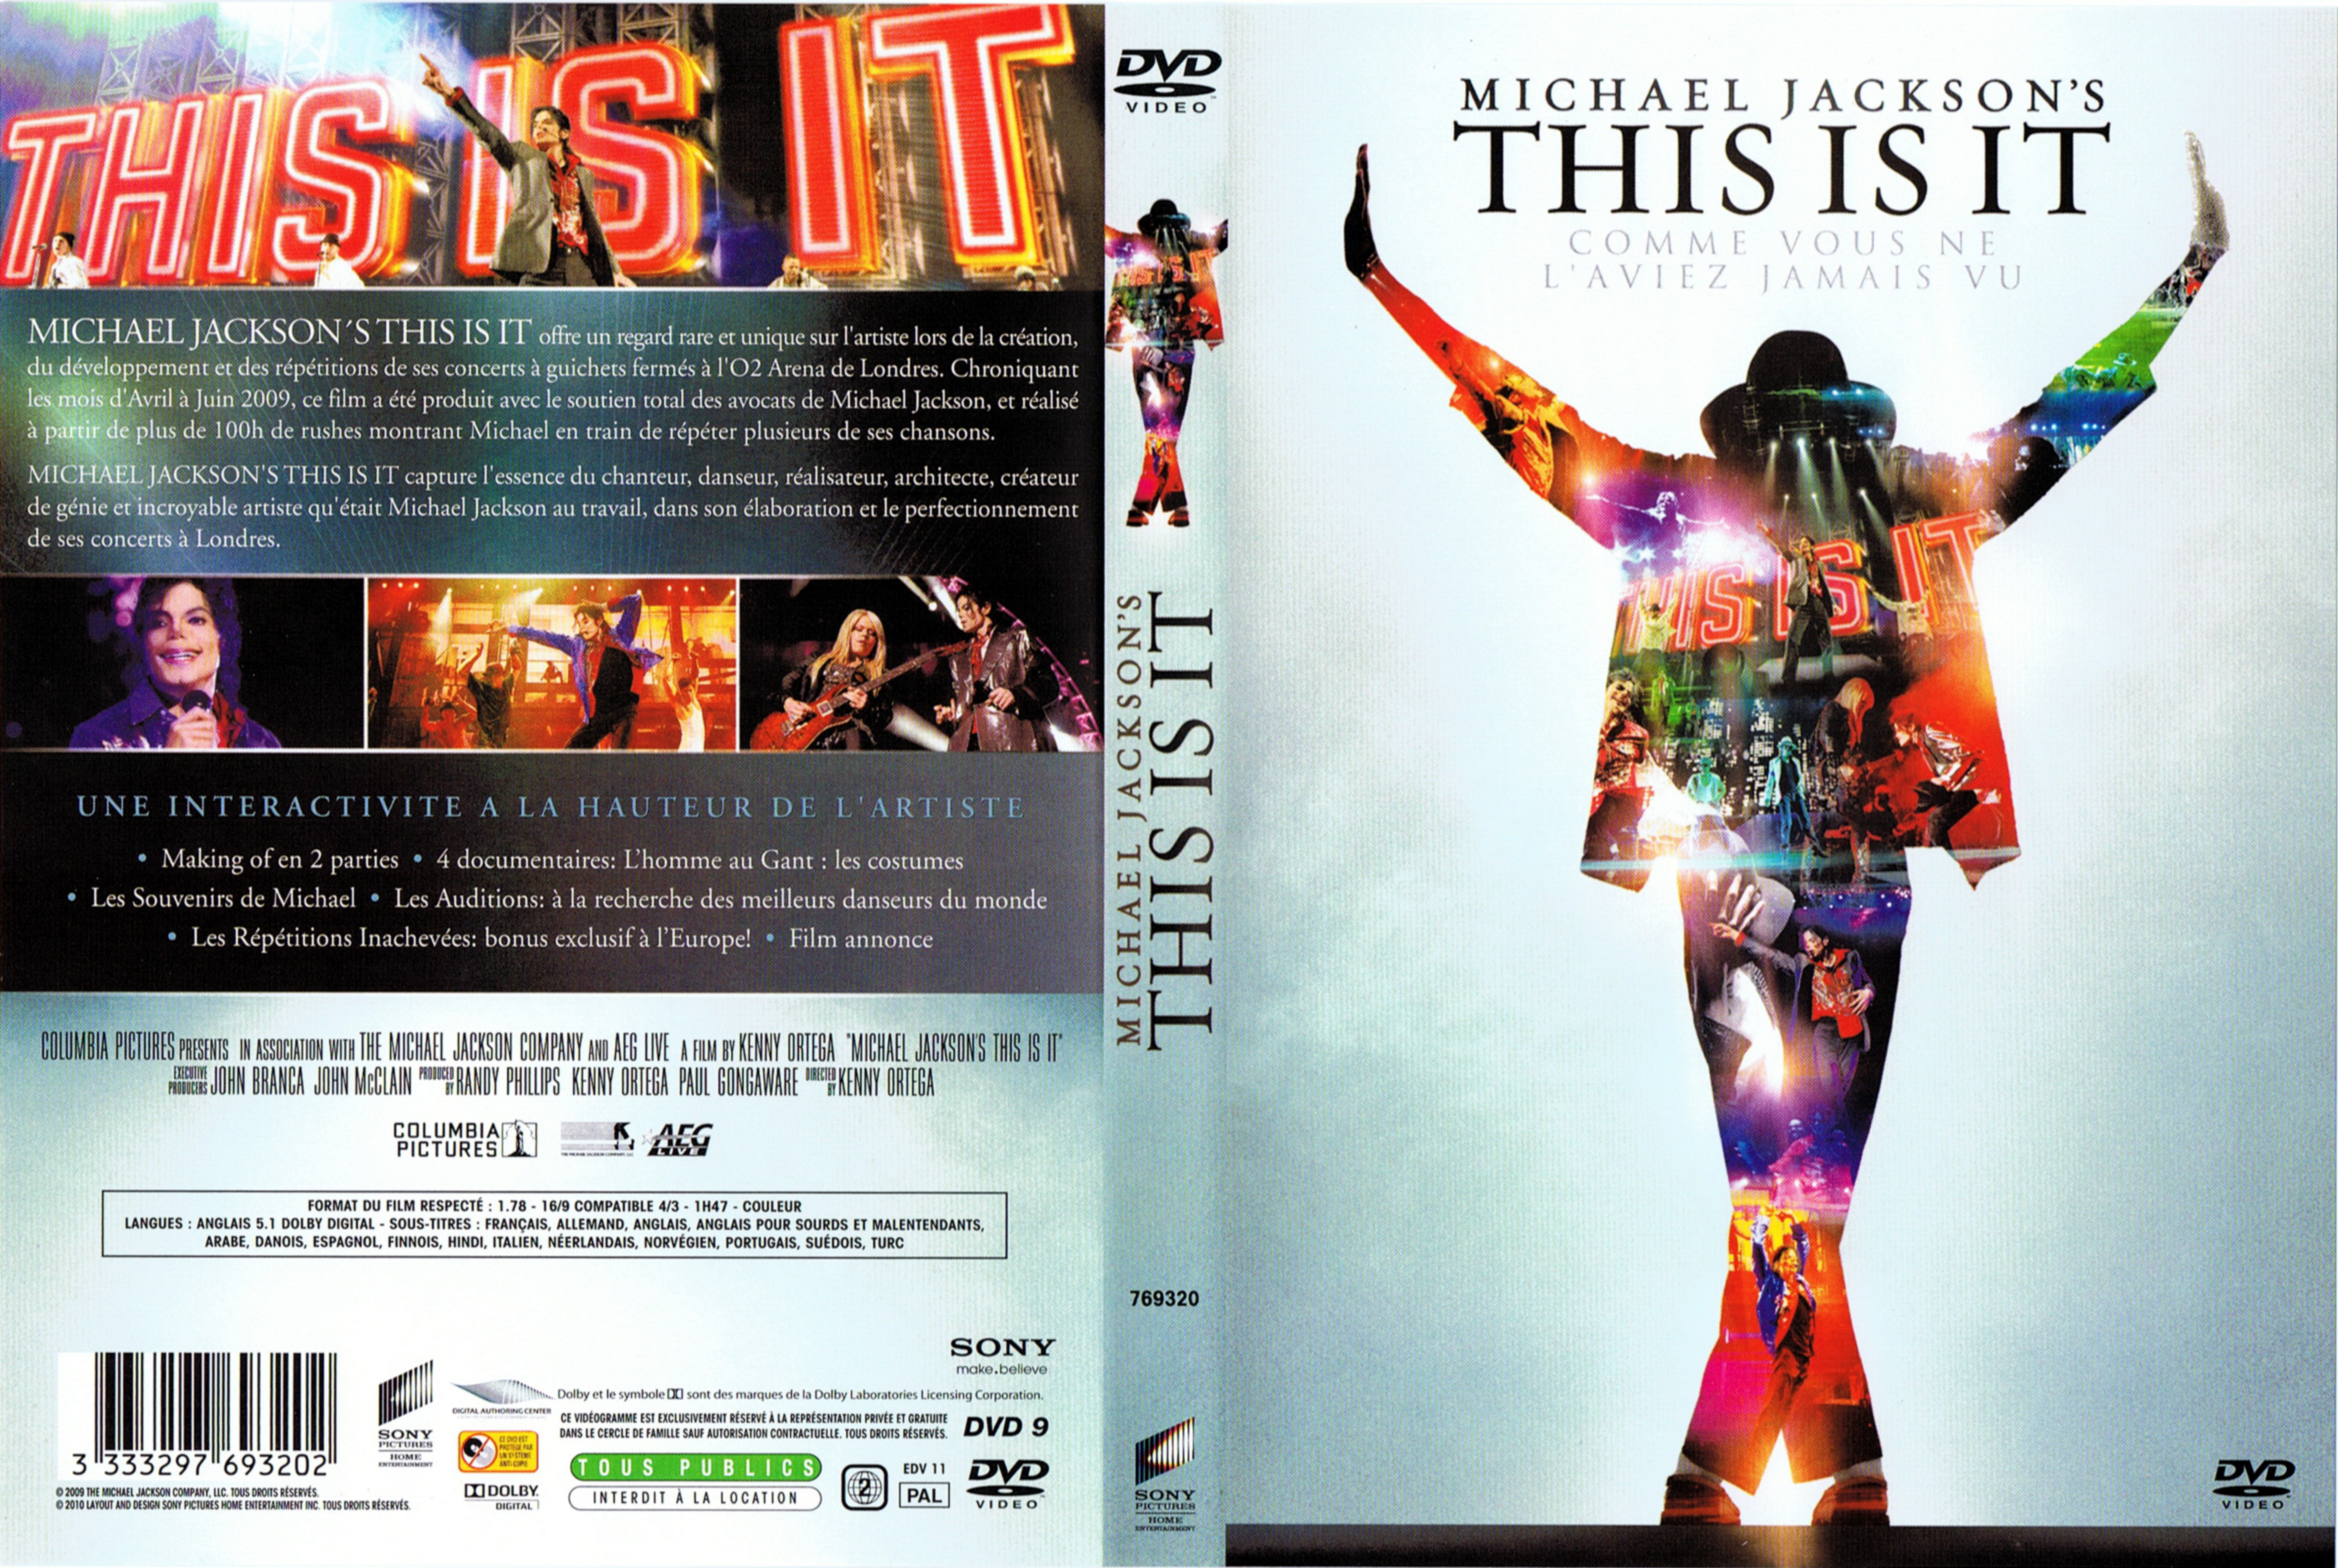 Jaquette DVD This is it